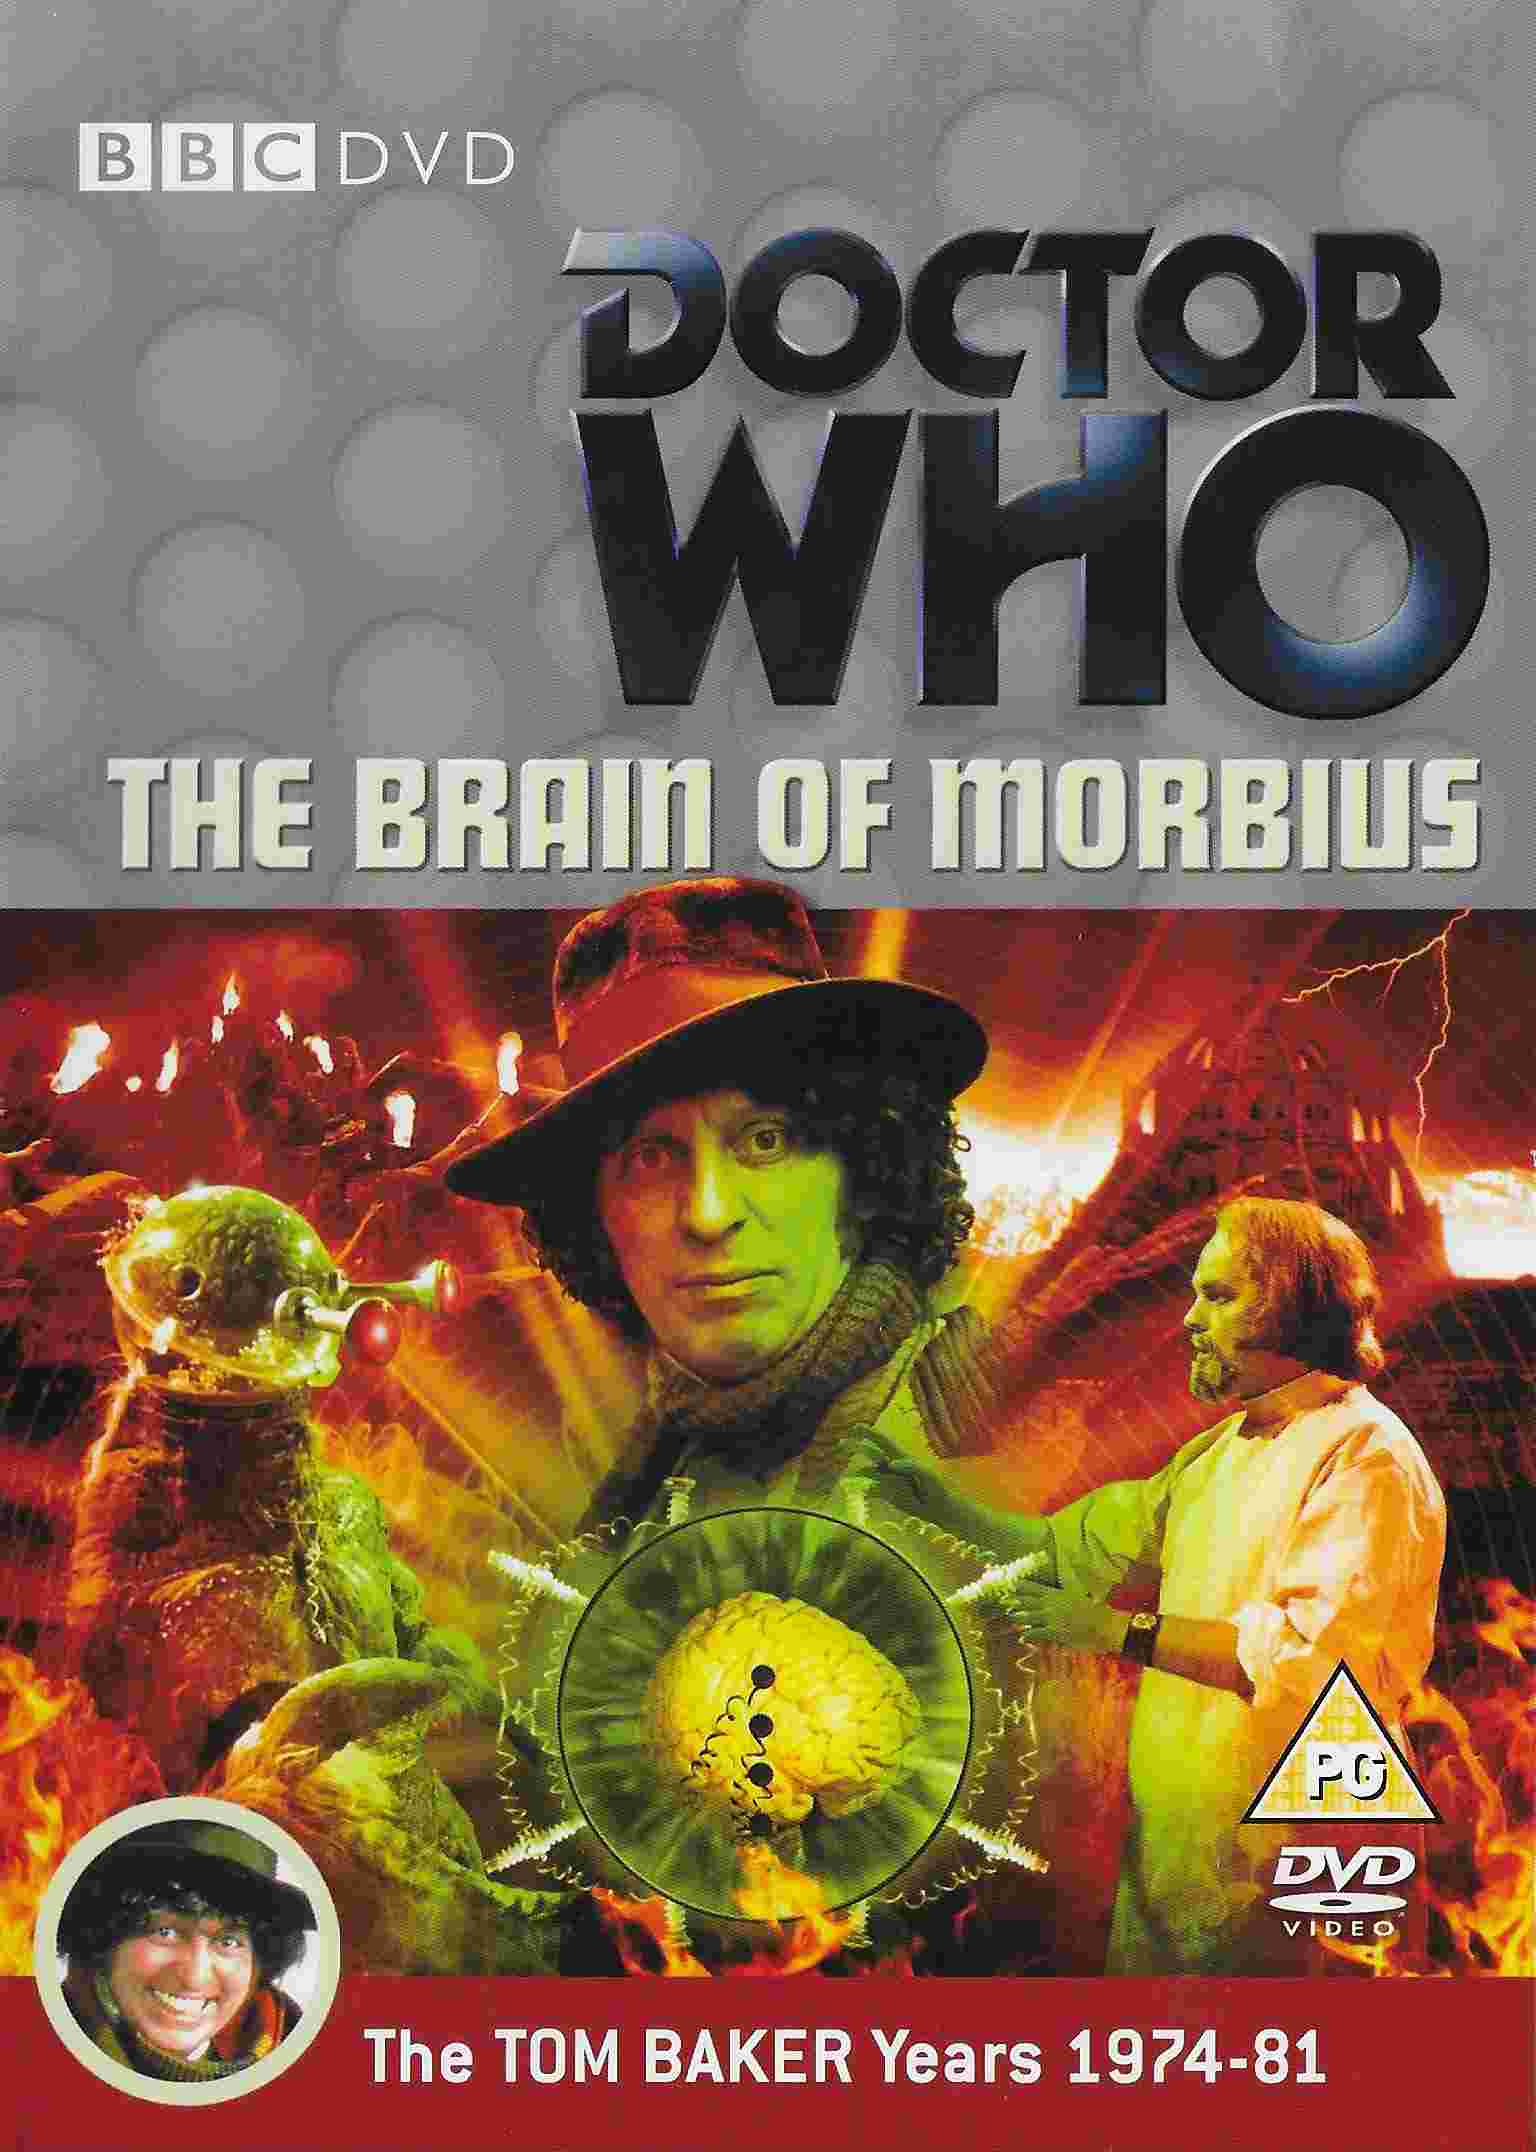 Picture of BBCDVD 1816 Doctor Who - The brain of Morbius by artist Robin Bland from the BBC dvds - Records and Tapes library